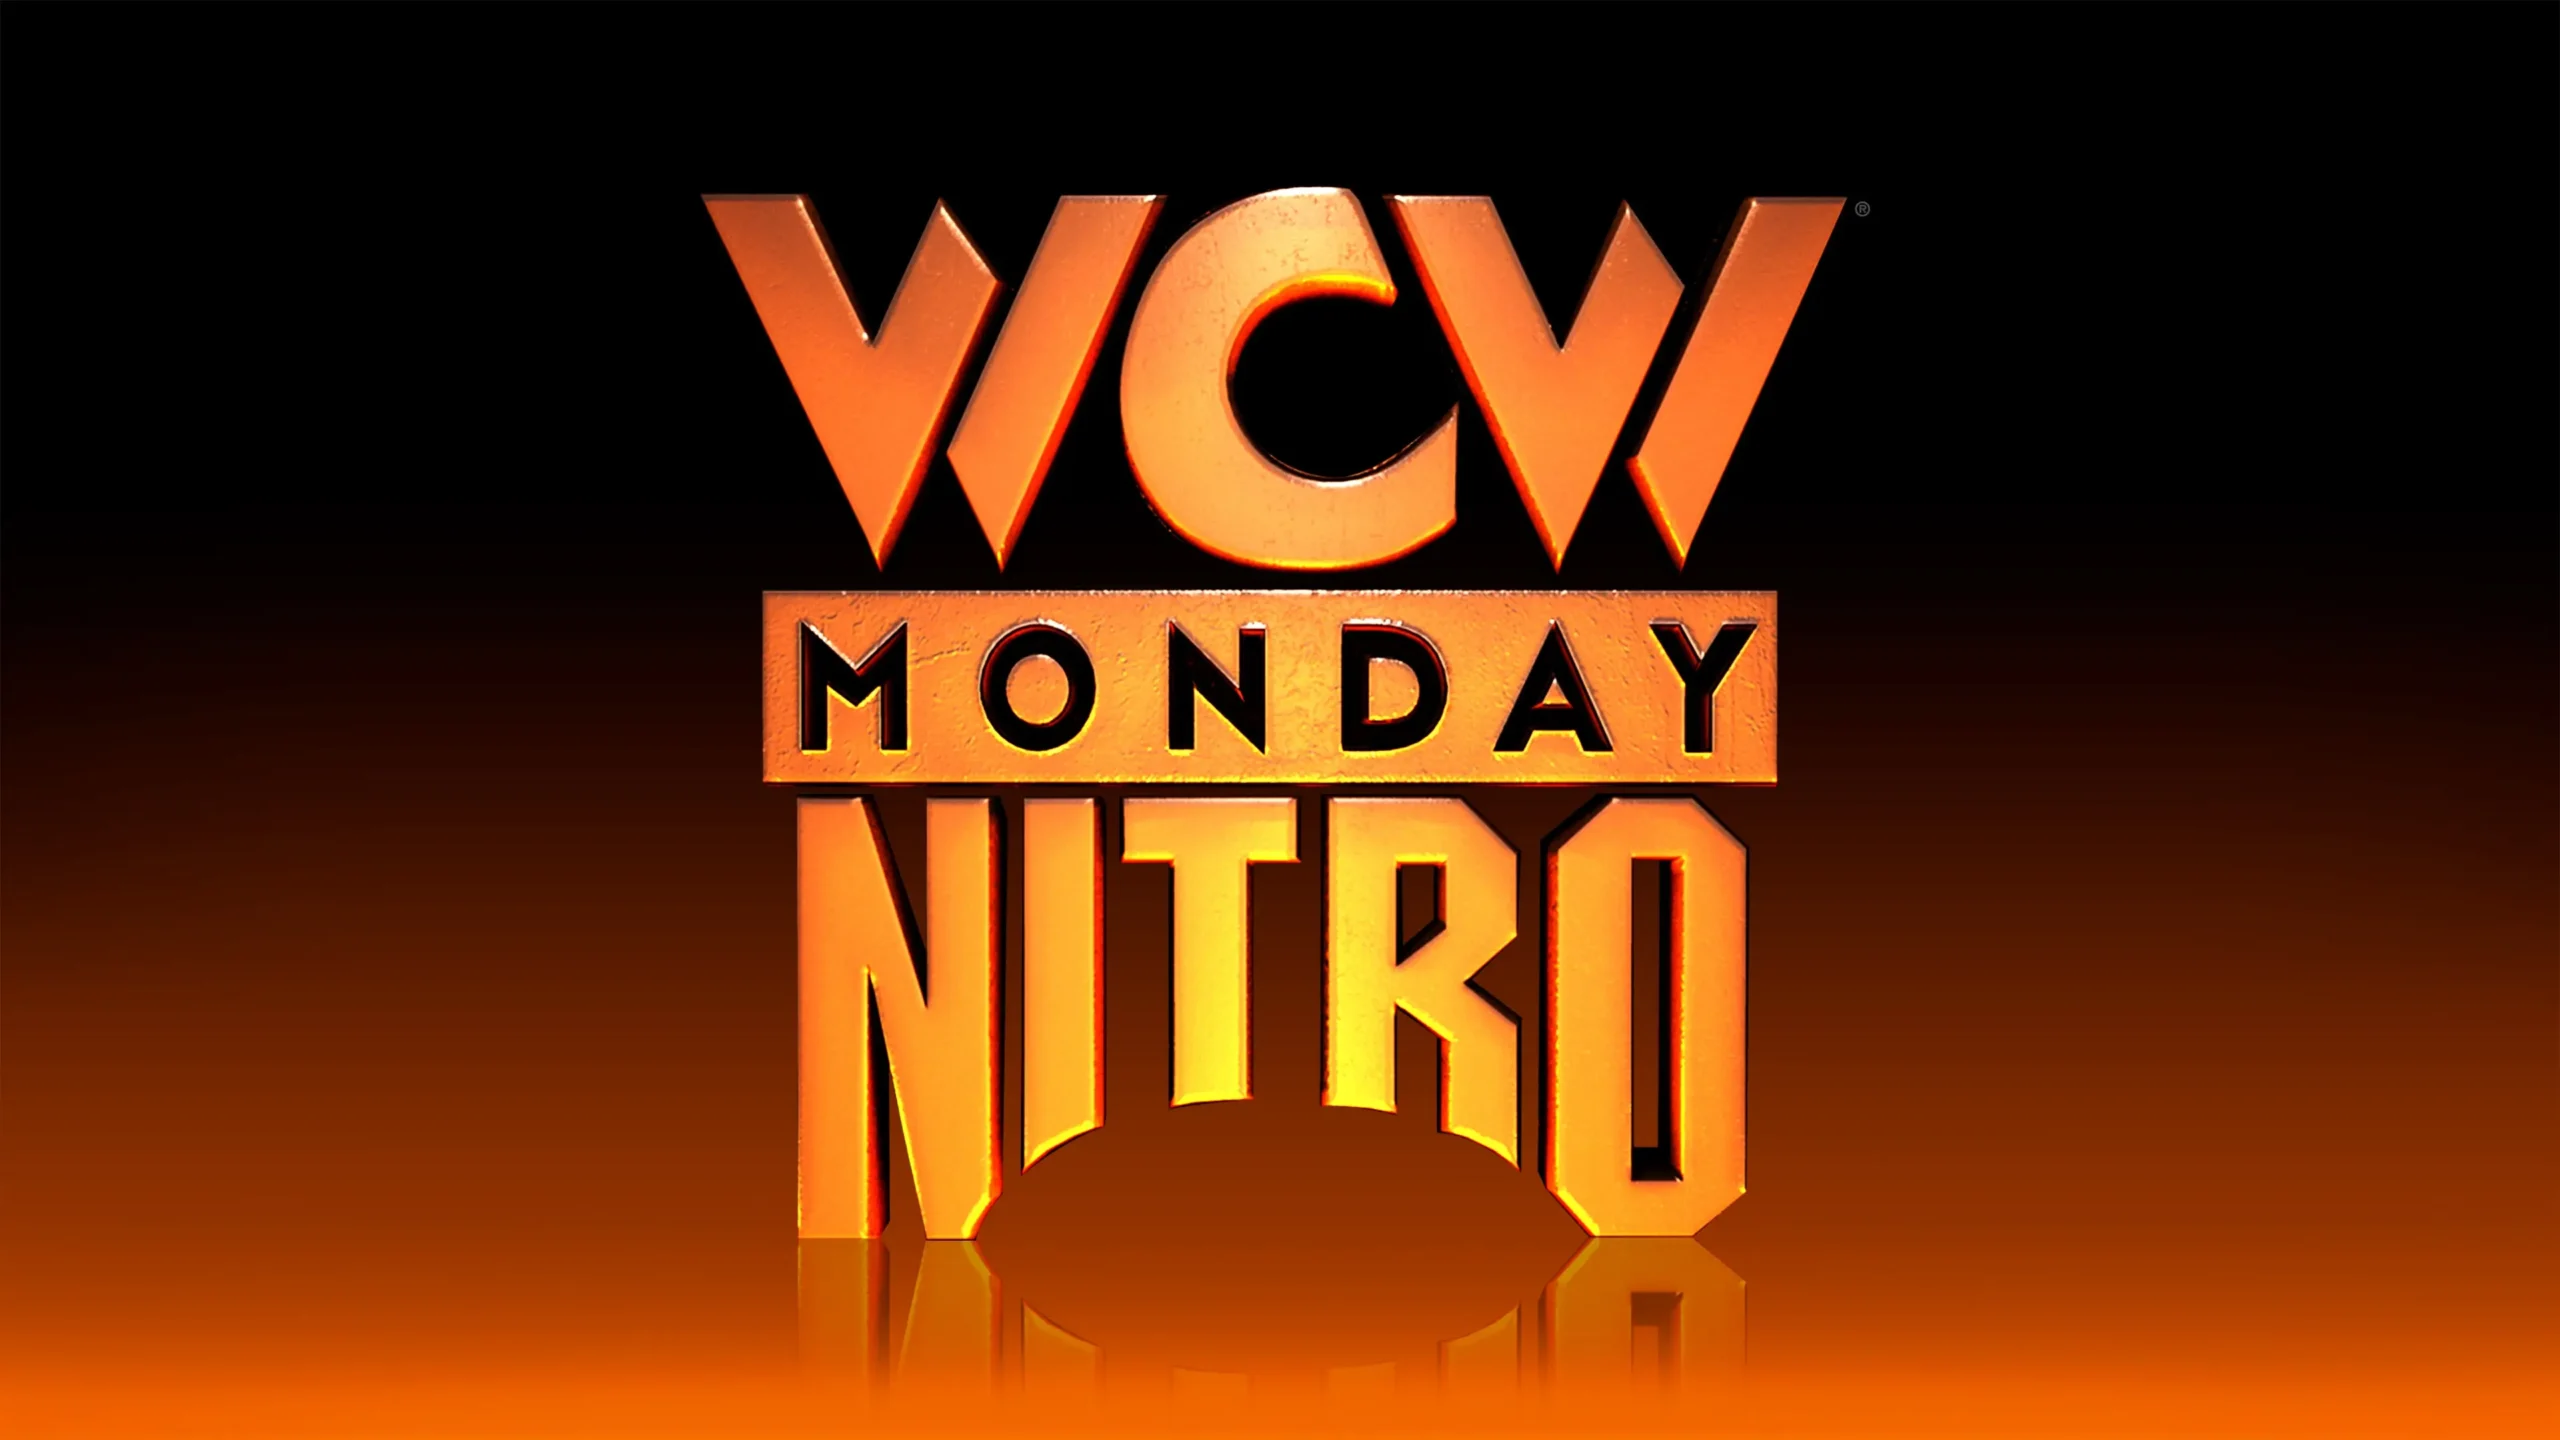 “Unseen Documentary Footage Reveals the Downfall of WCW: Who was responsible?”